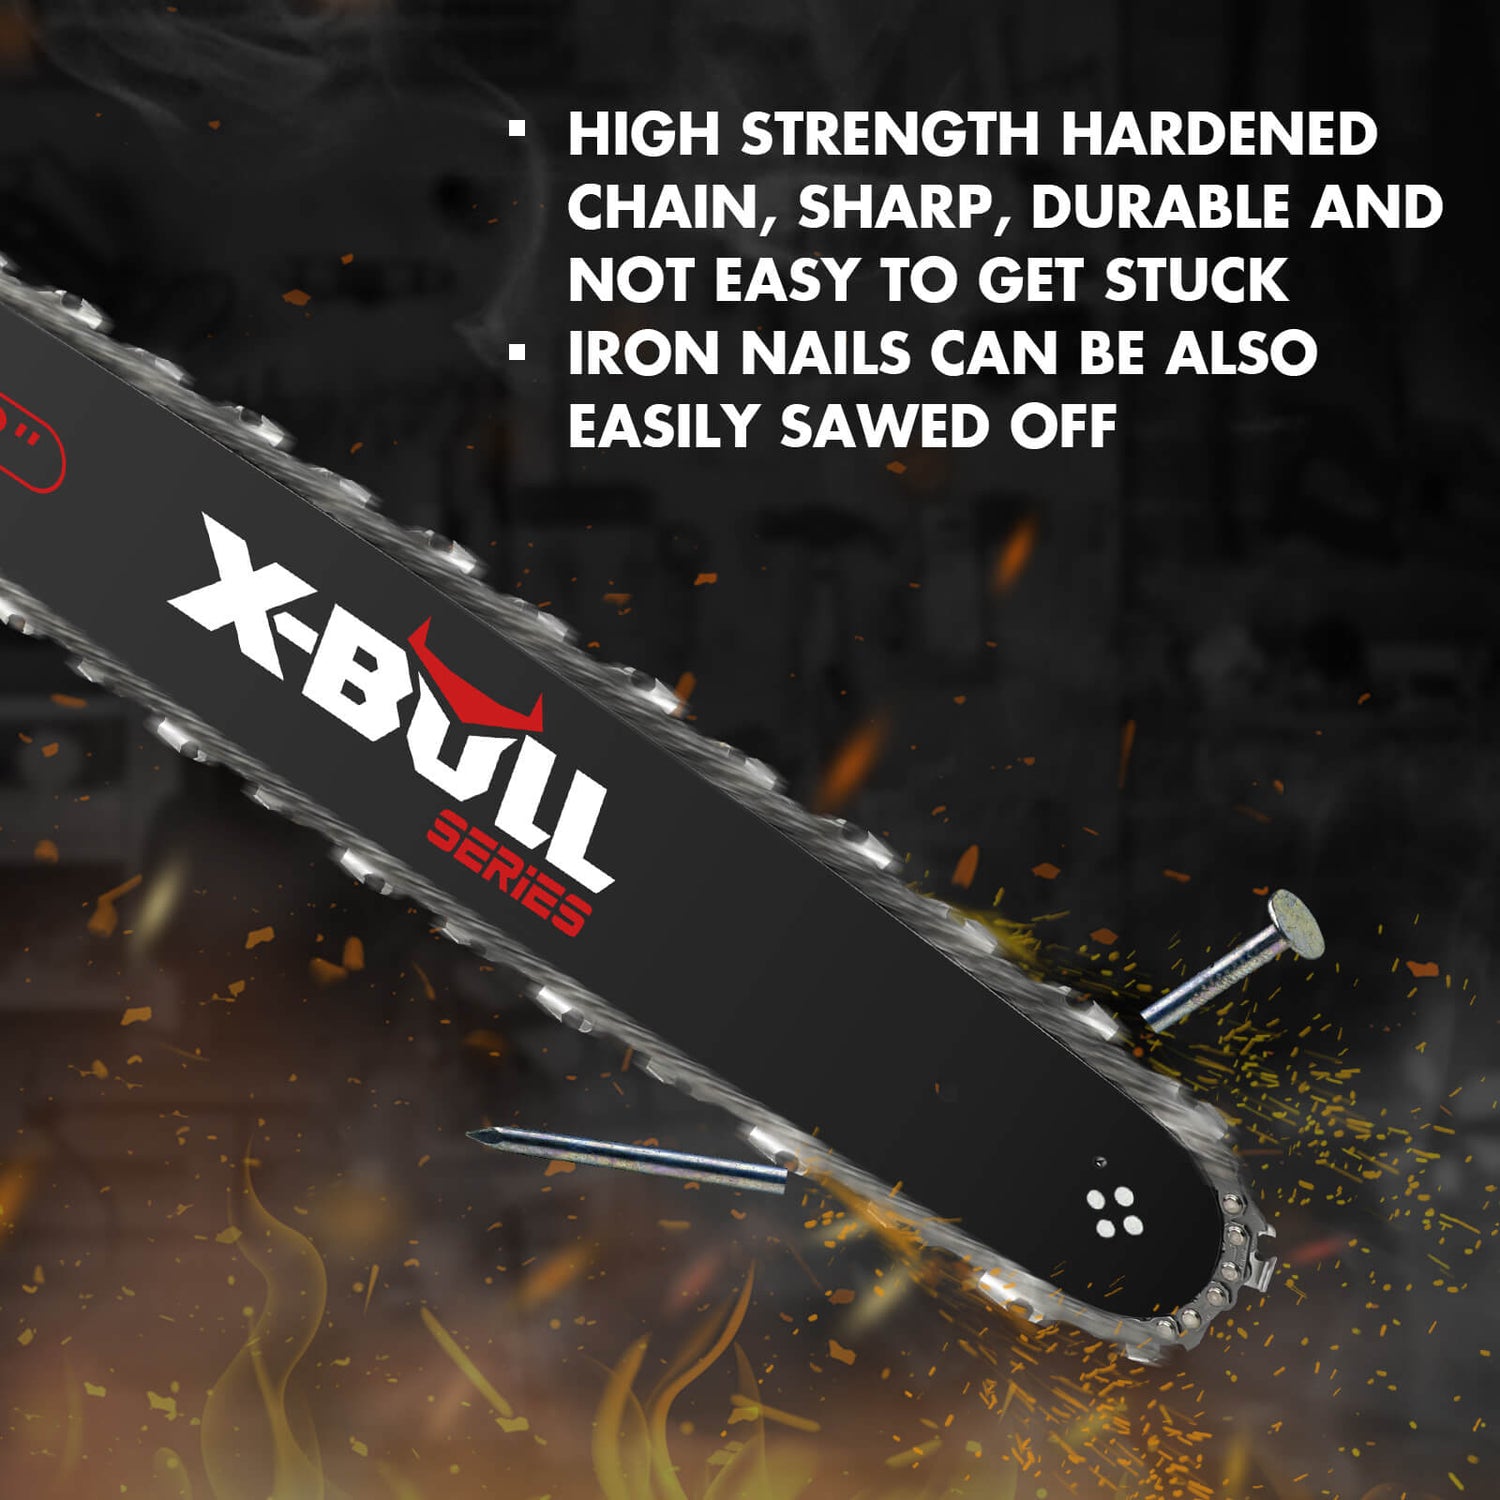 X-BULL| Petrol Chainsaw Commercial 62cc -  22&quot; Bar E-Start Tree Pruning Top Handle